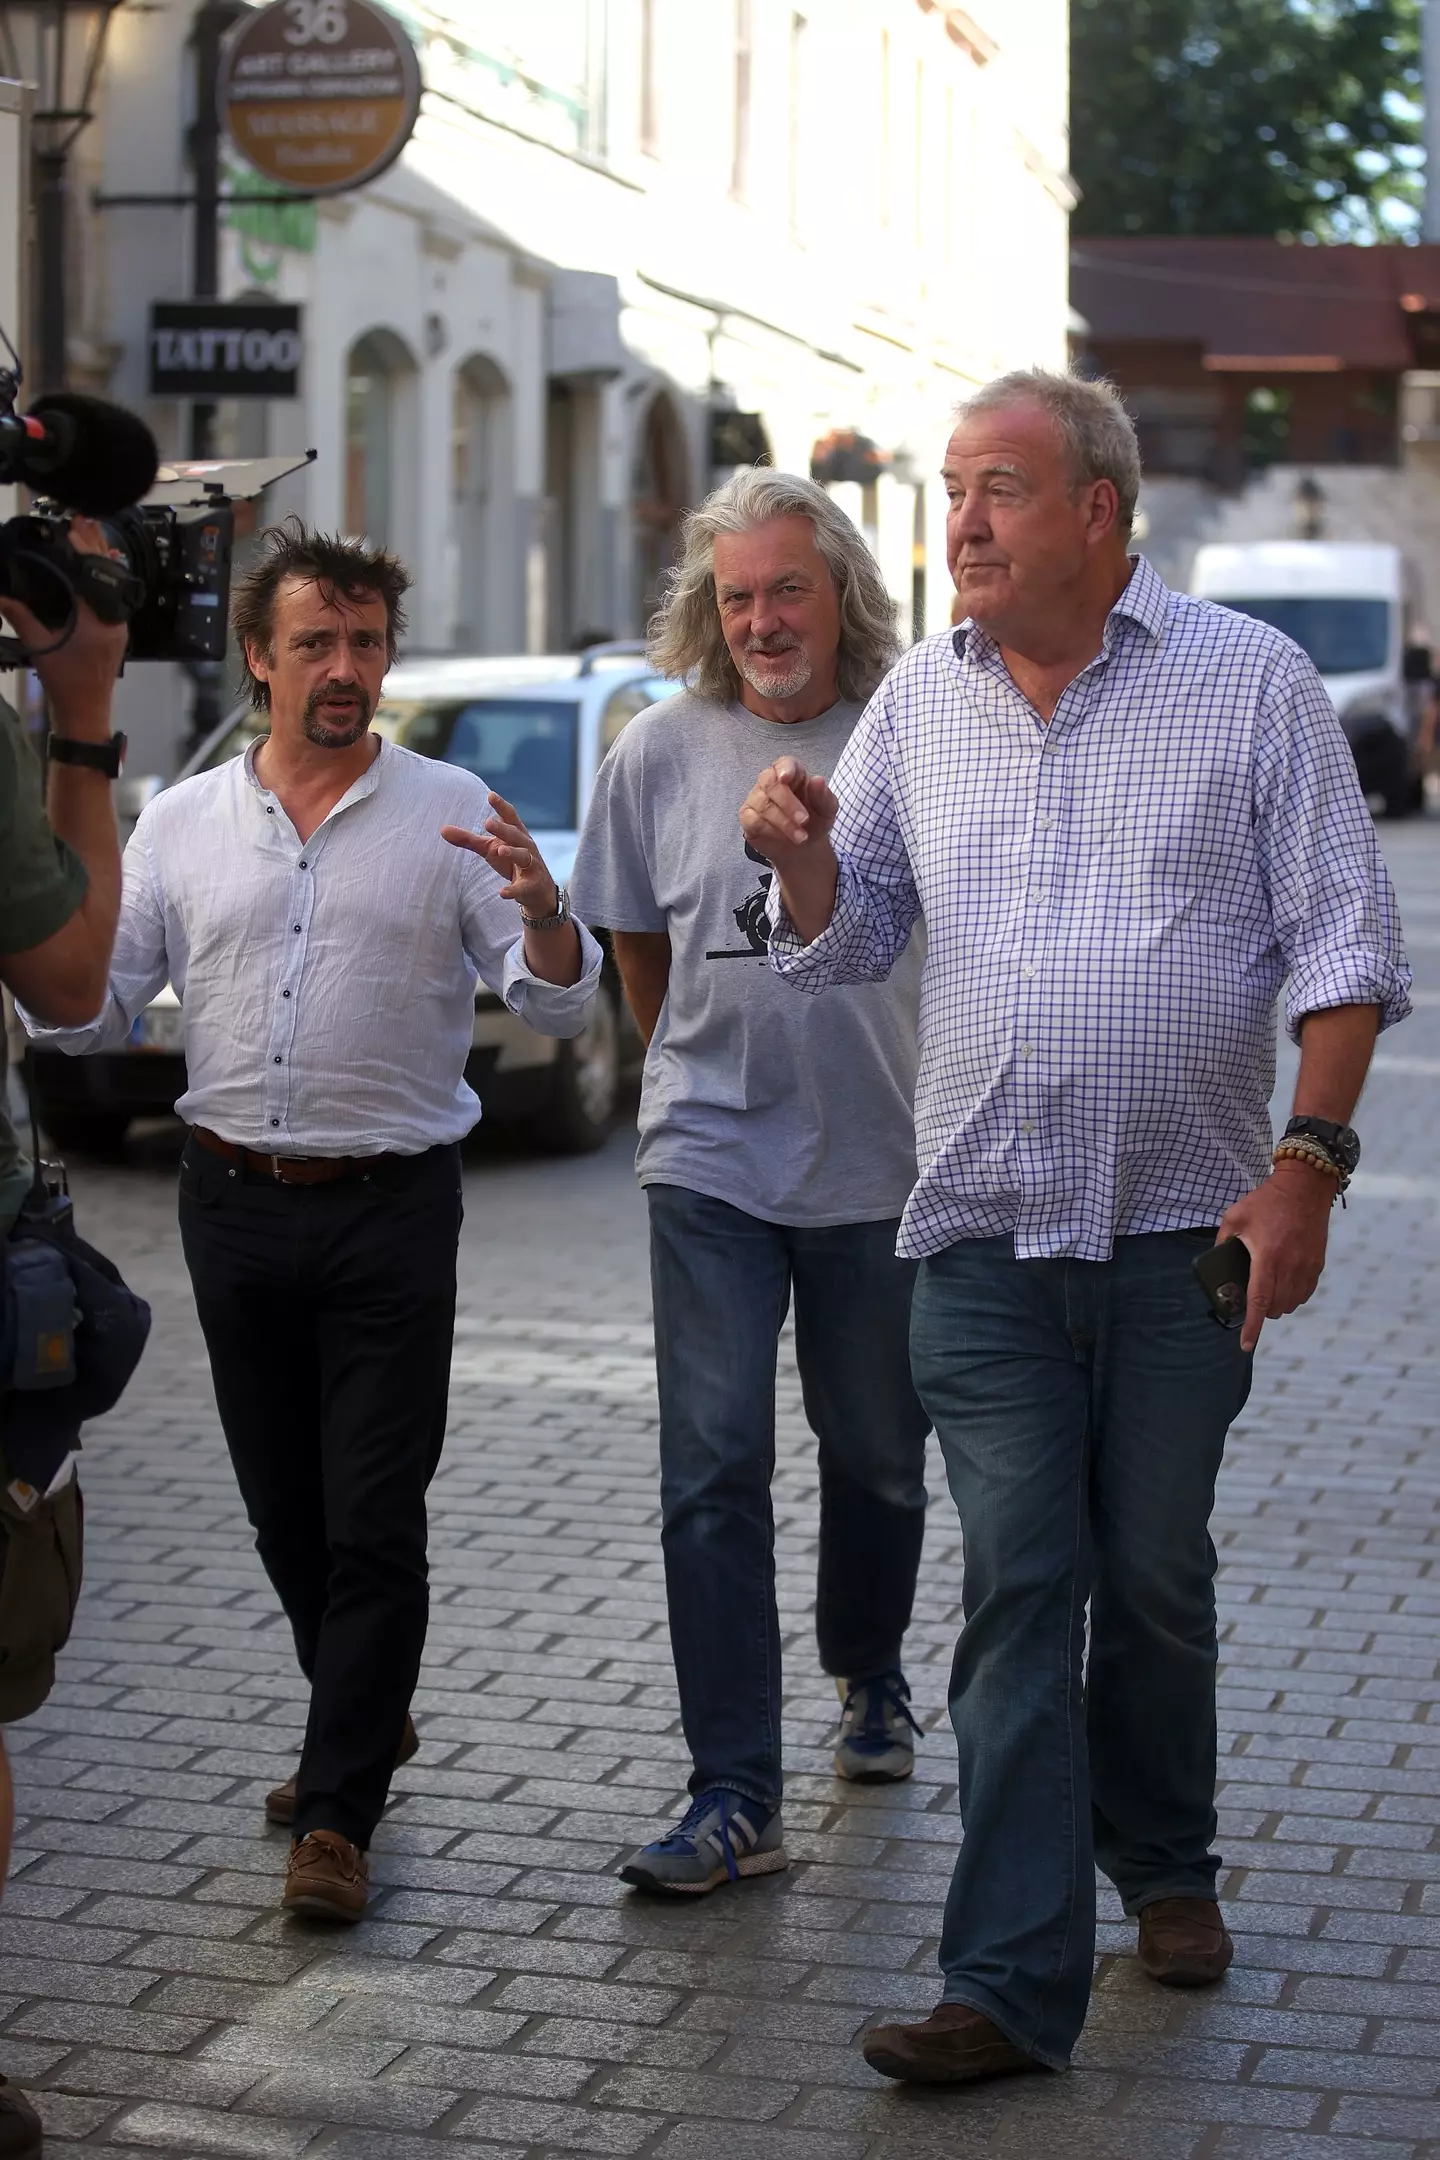 May with Top Gear and Grand Tour co-hosts Richard Hammond and Jeremy Clarkson. (Vito Corleone/SOPA Images/LightRocket via Getty Images)